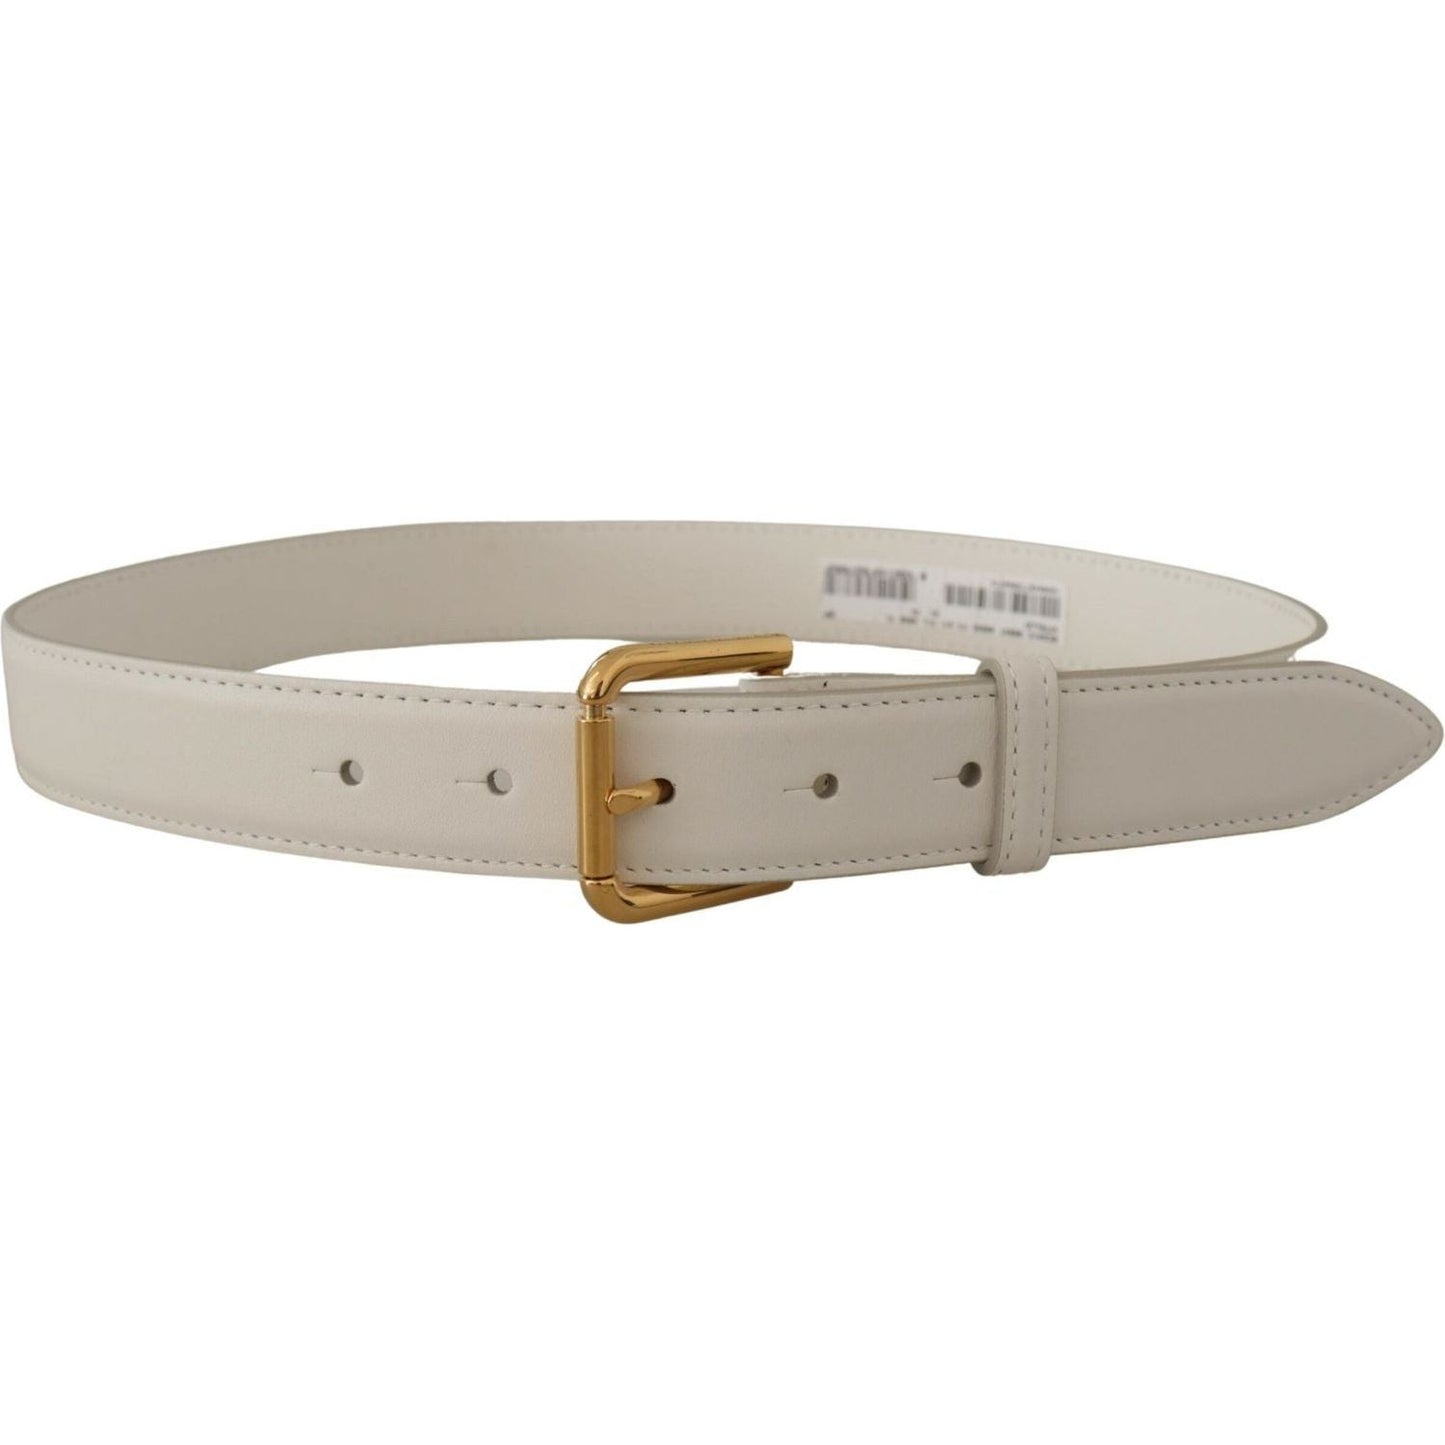 Dolce & Gabbana Chic White Leather Belt with Gold Engraved Buckle white-calf-leather-gold-tone-logo-metal-buckle-belt IMG_8043-1-scaled-01833599-7b1.jpg